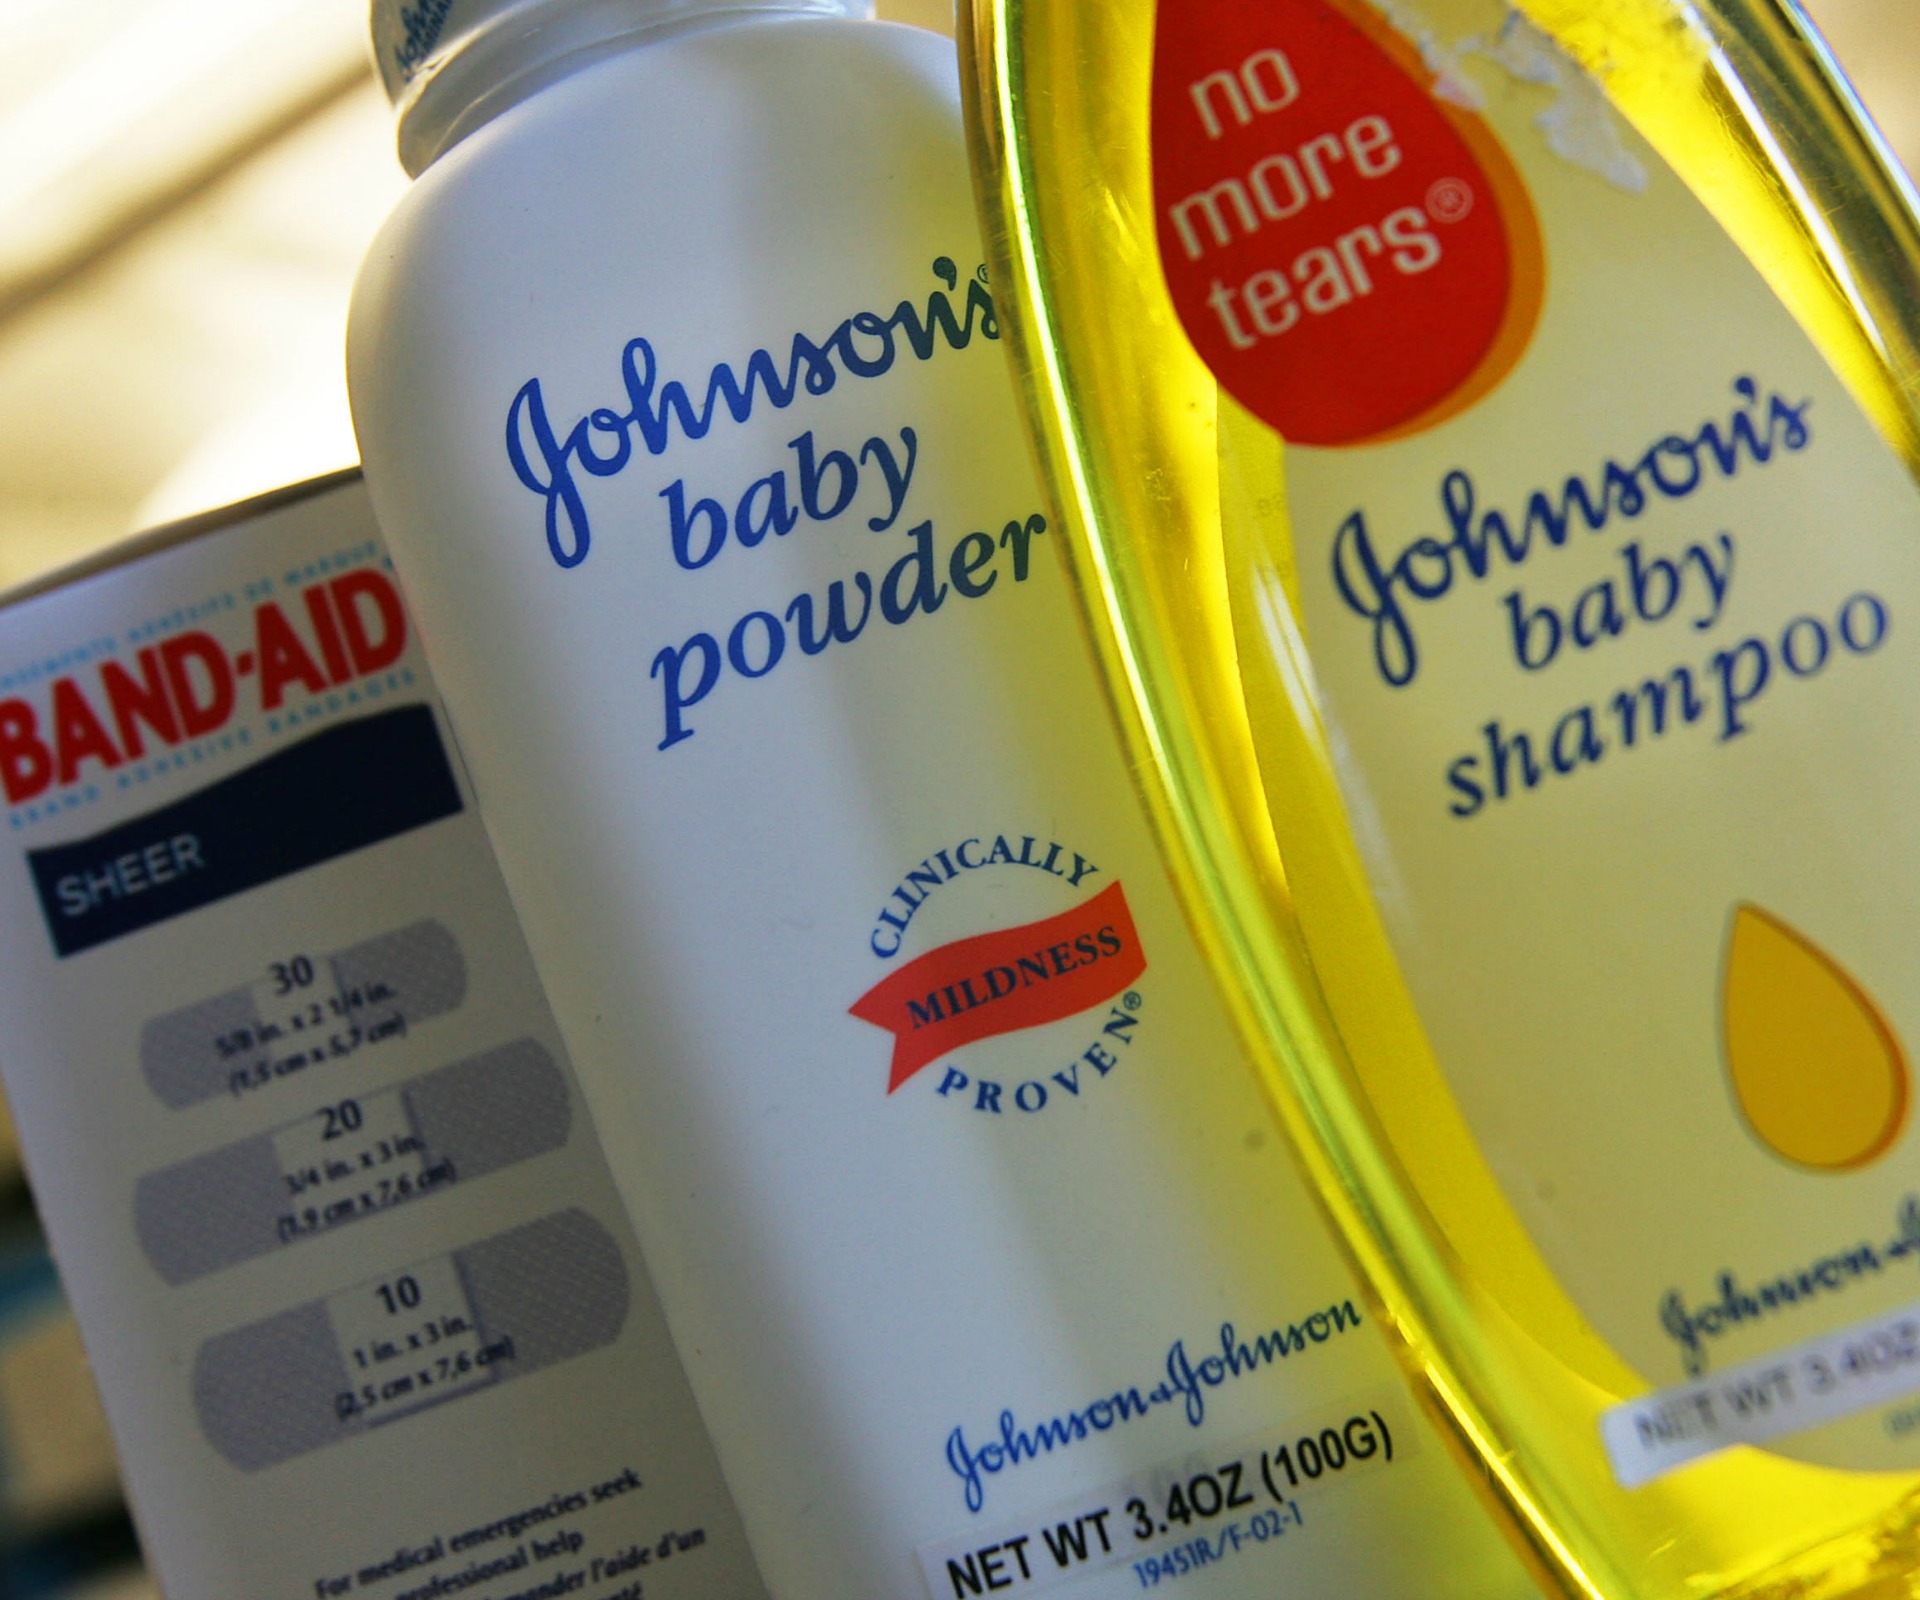 Johnson & Johnson ordered to pay $100 million over cancer death